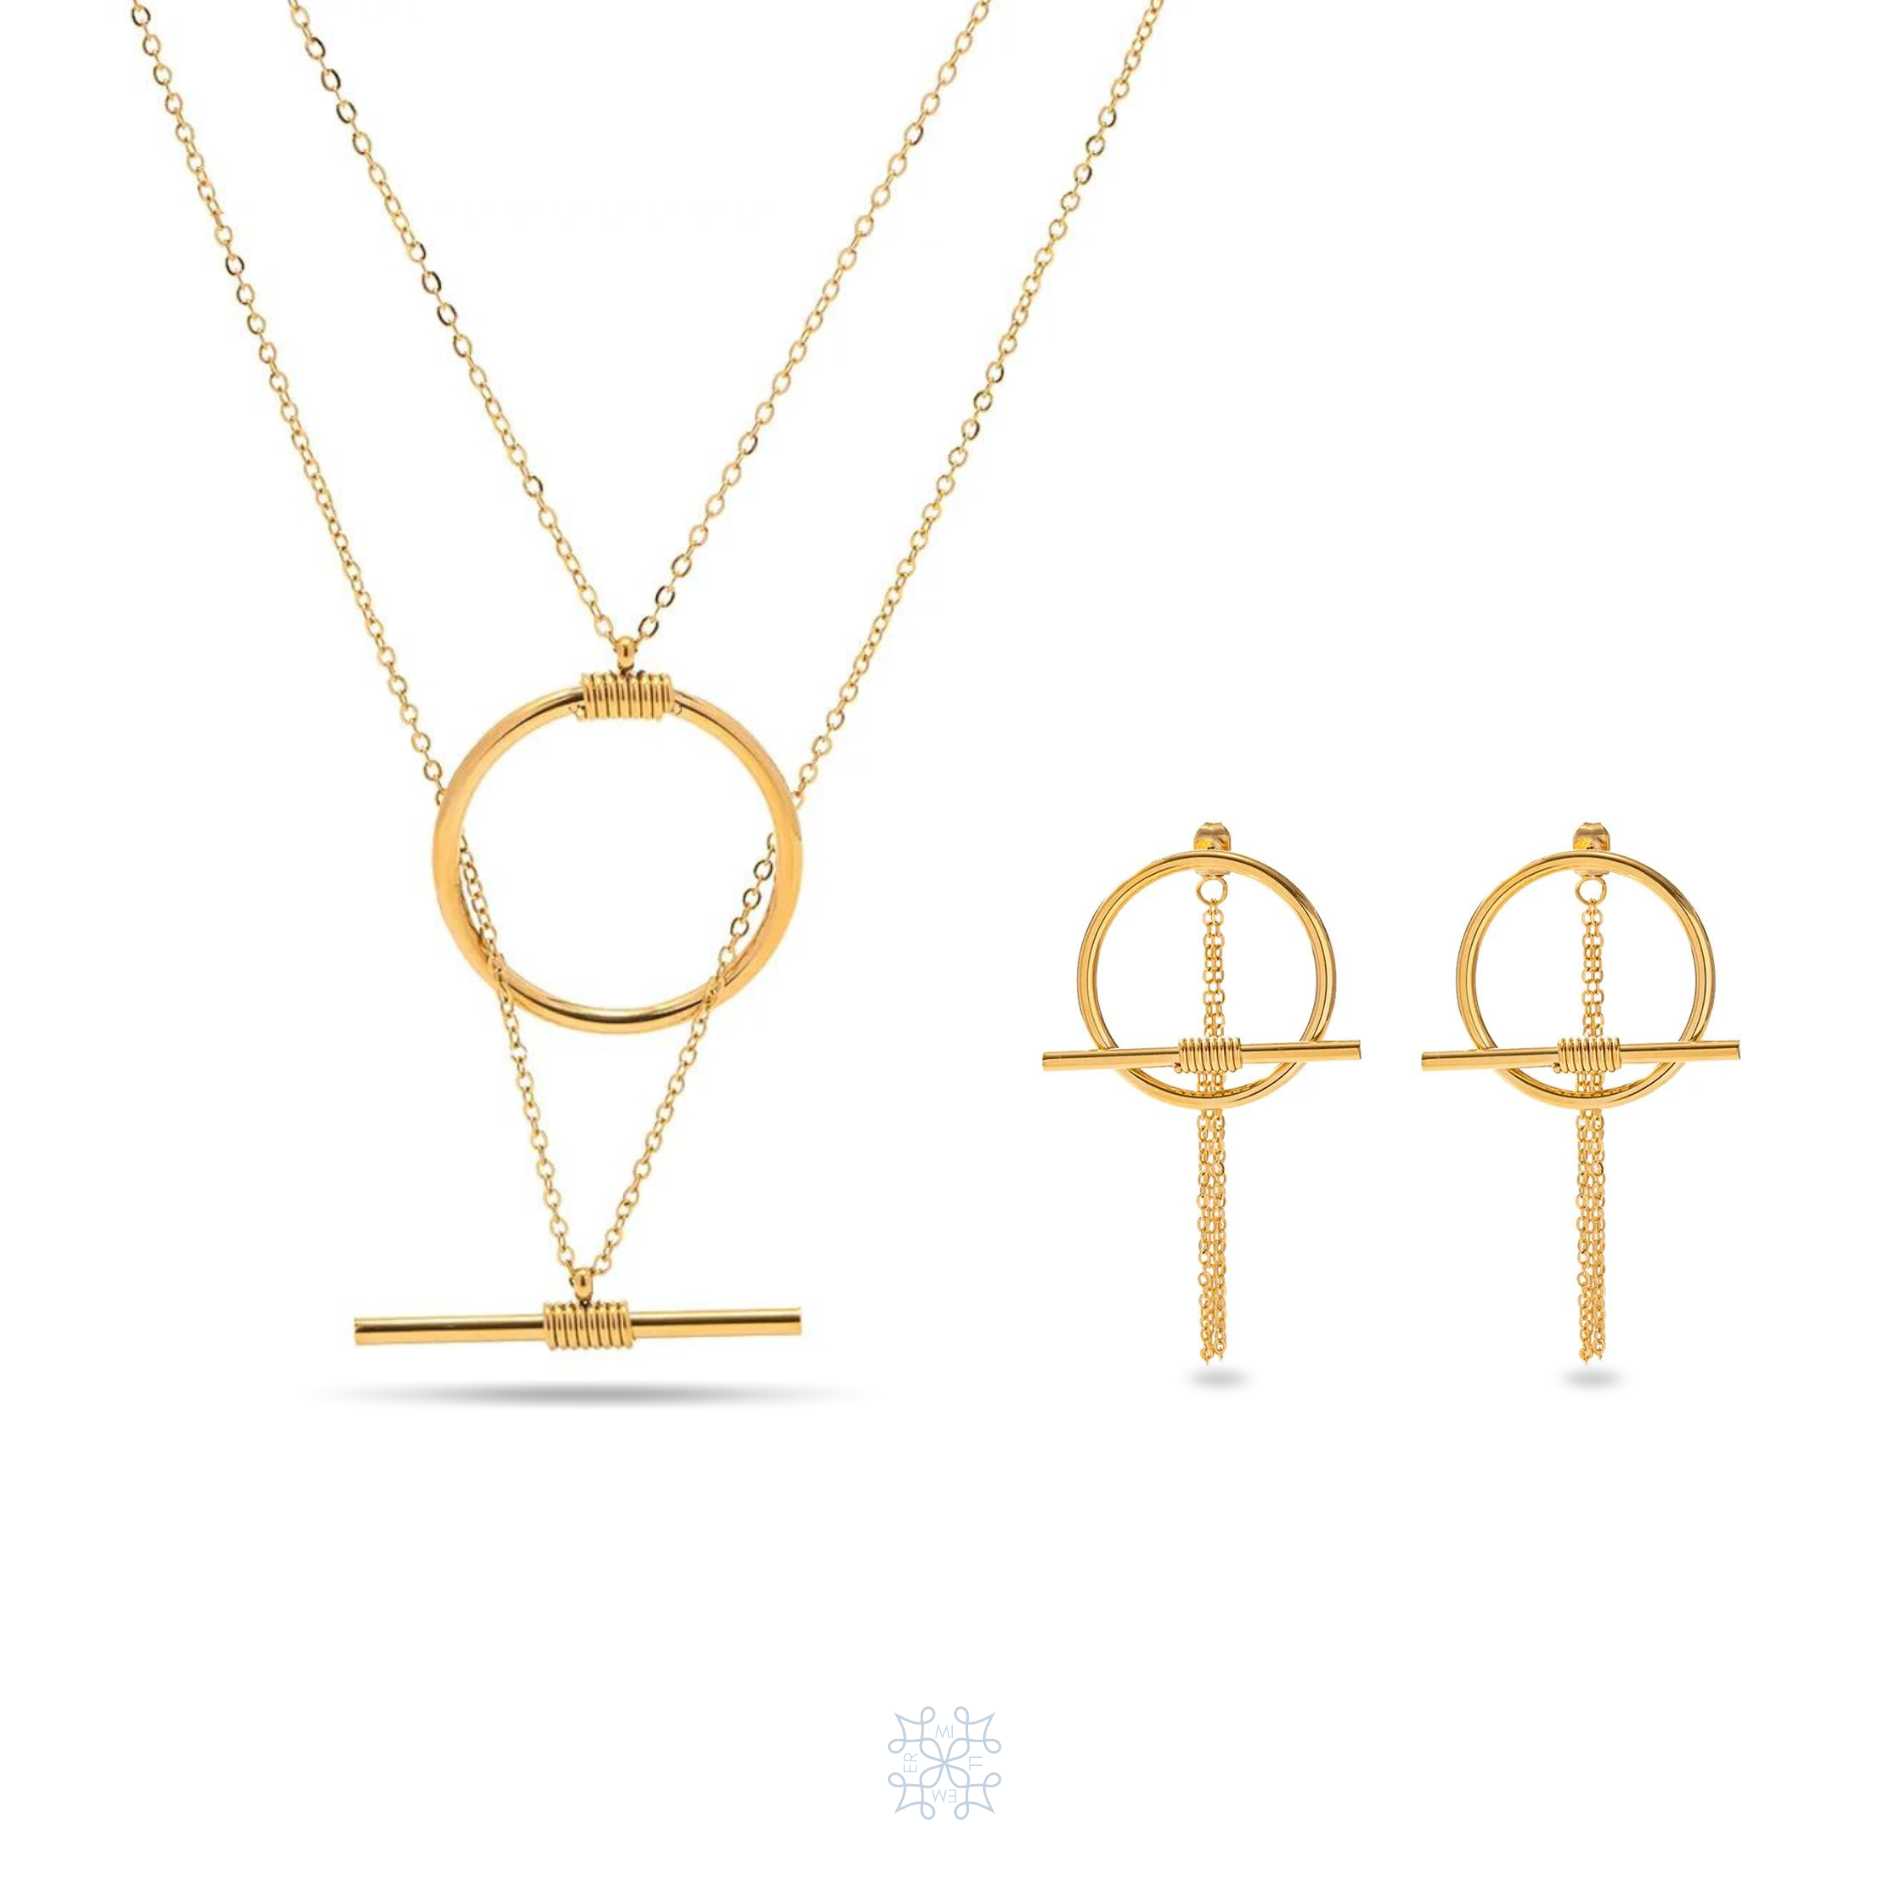 BALANCE Set Gold -Chain Necklace paired with drop chain earrings. Circle pendant on the necklace. Ciurcle hoop earrings with a chin attached at the posts on the back.